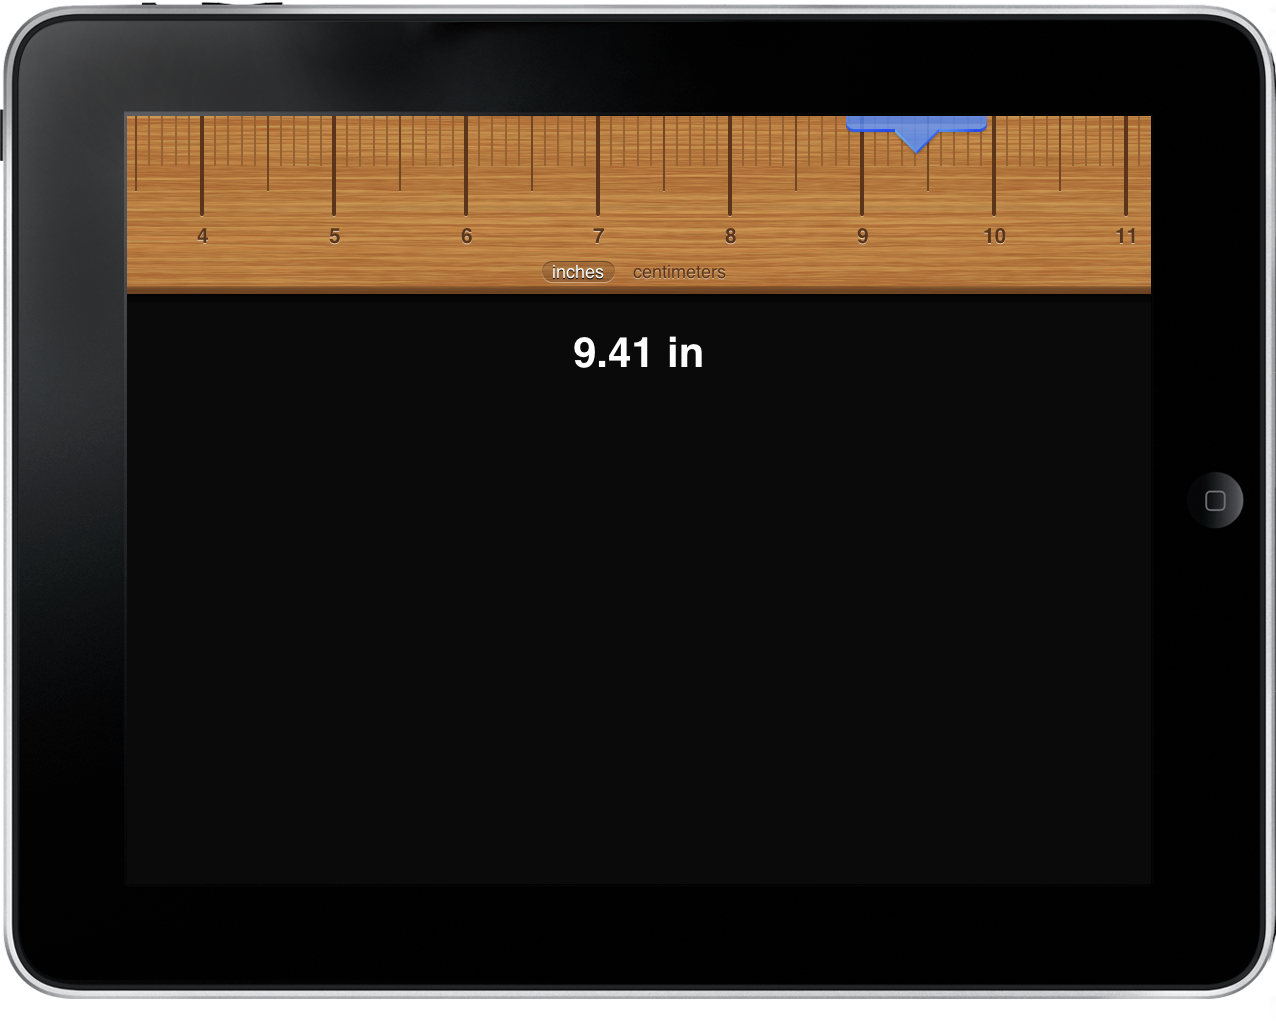 Ruler for iPad Measures Anything You Want